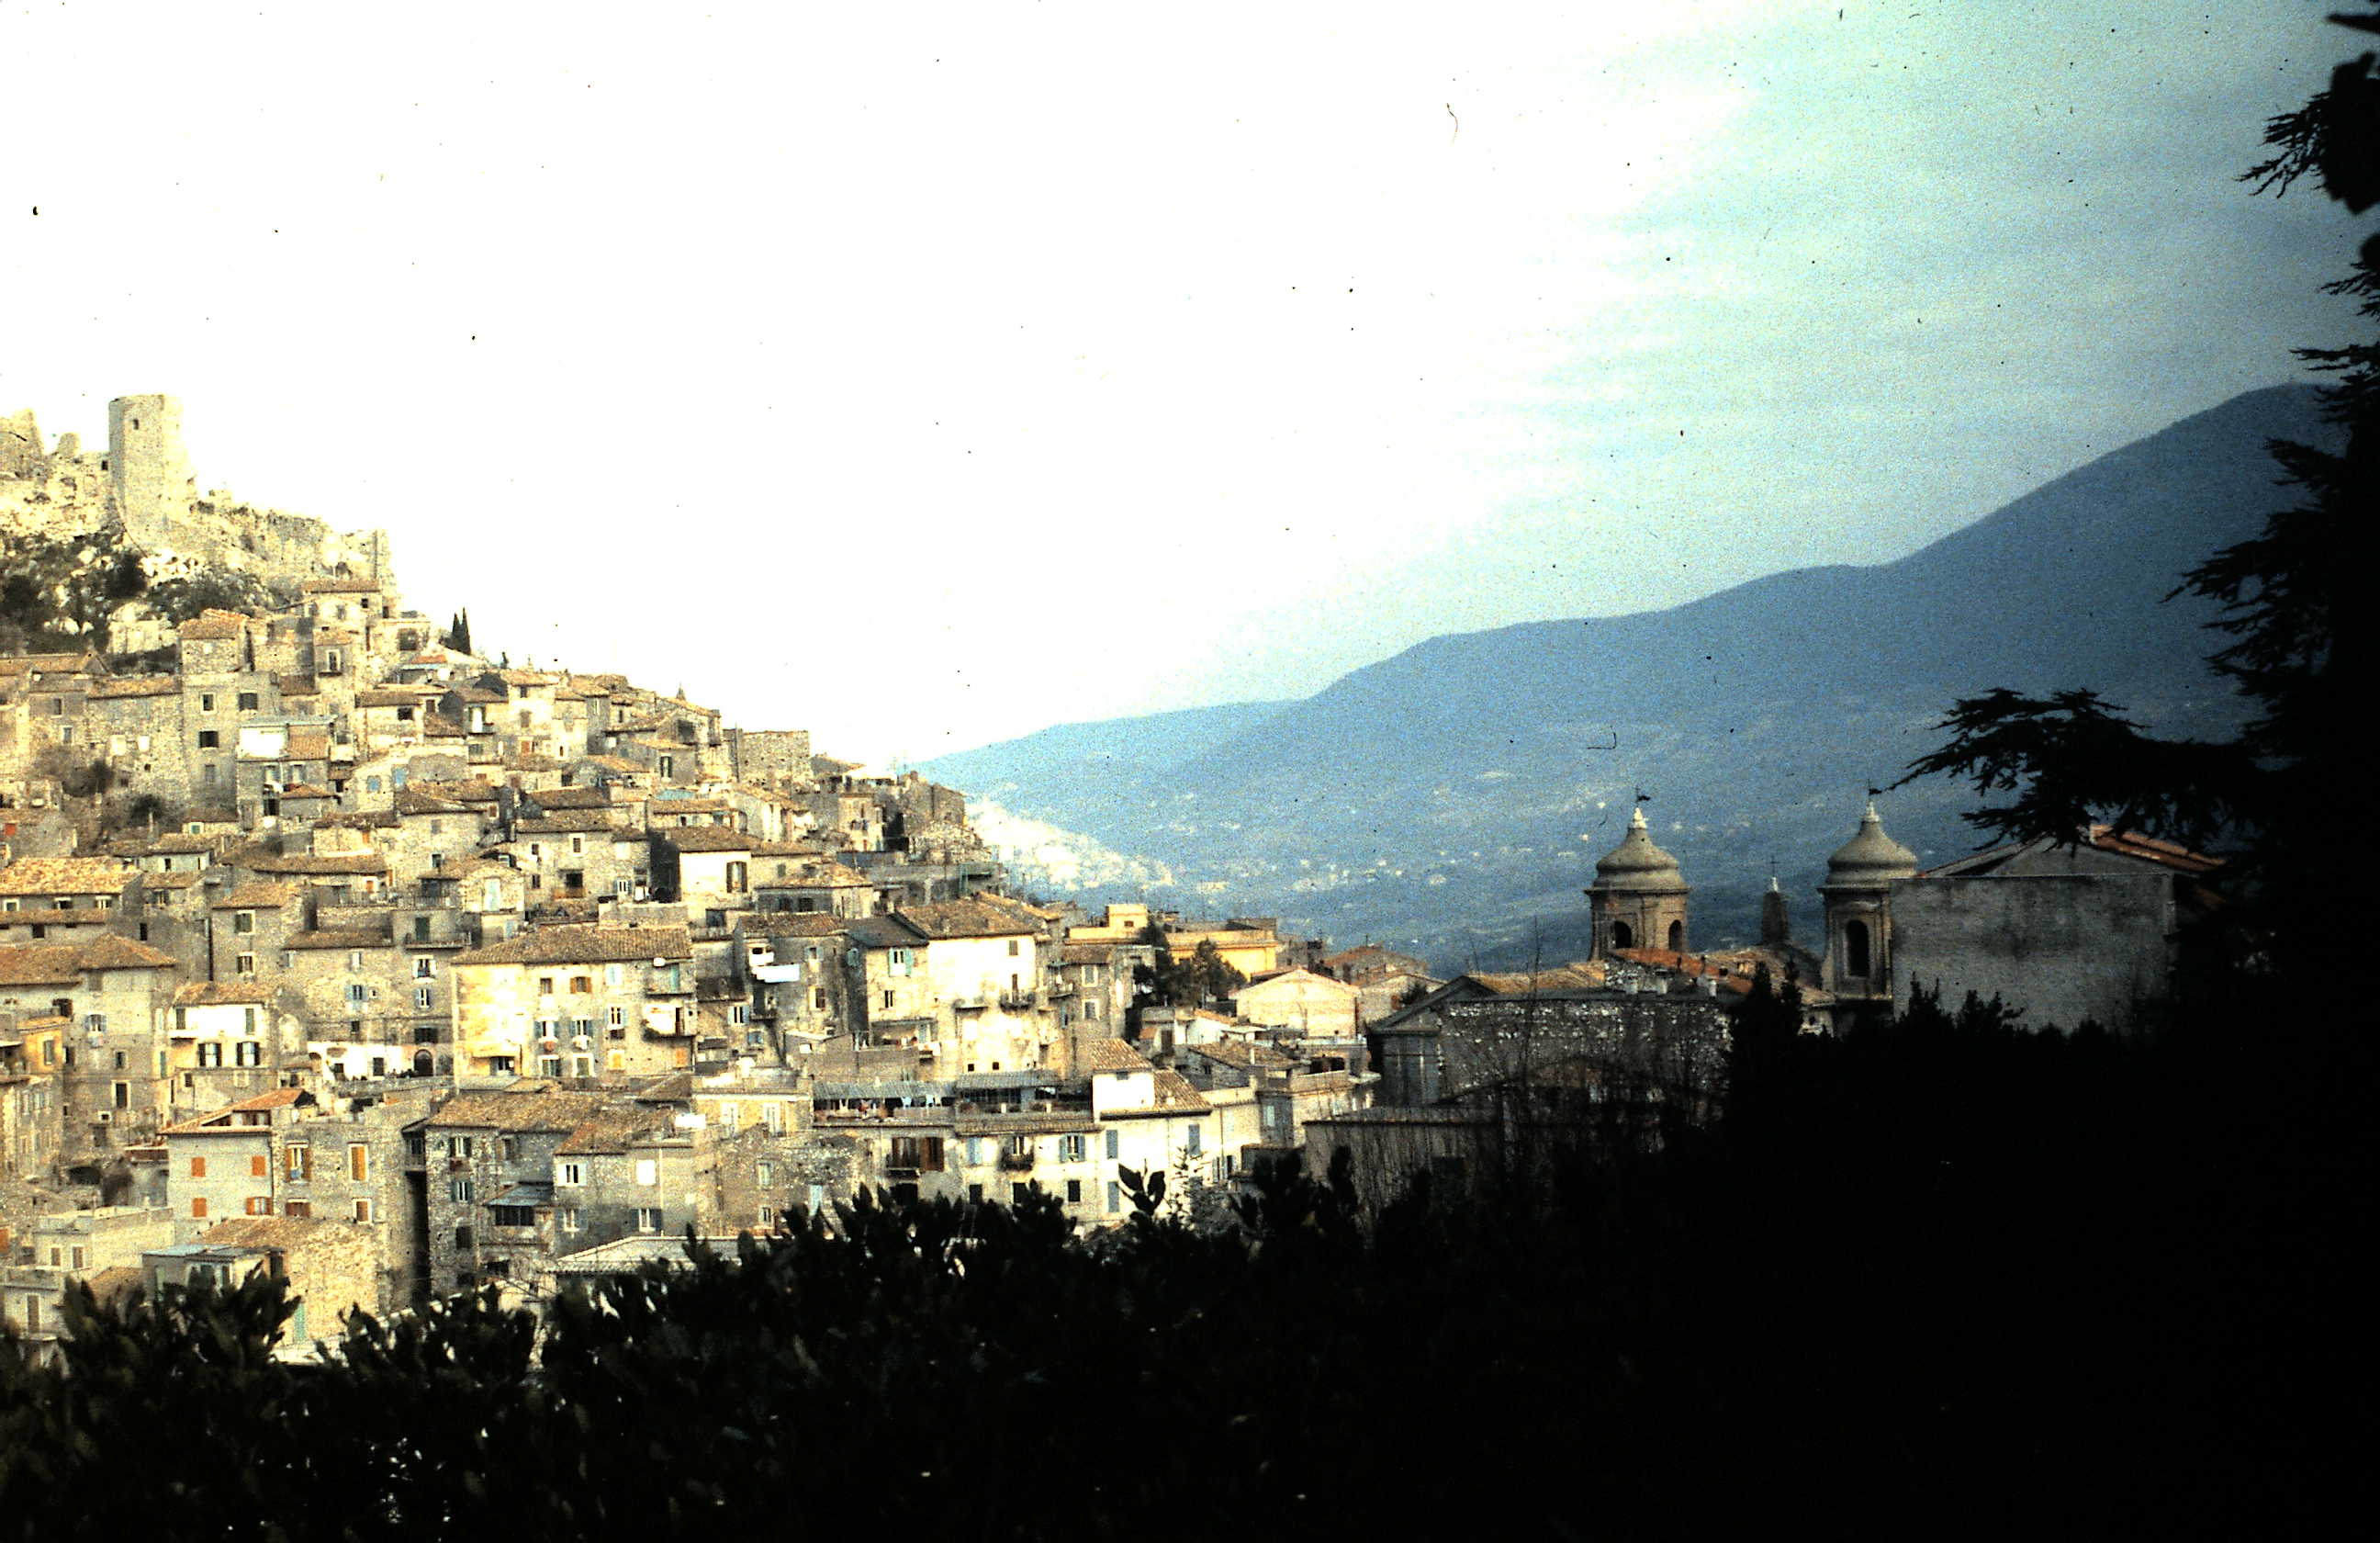 Montecelio: the Architectural History of an Italian hill town